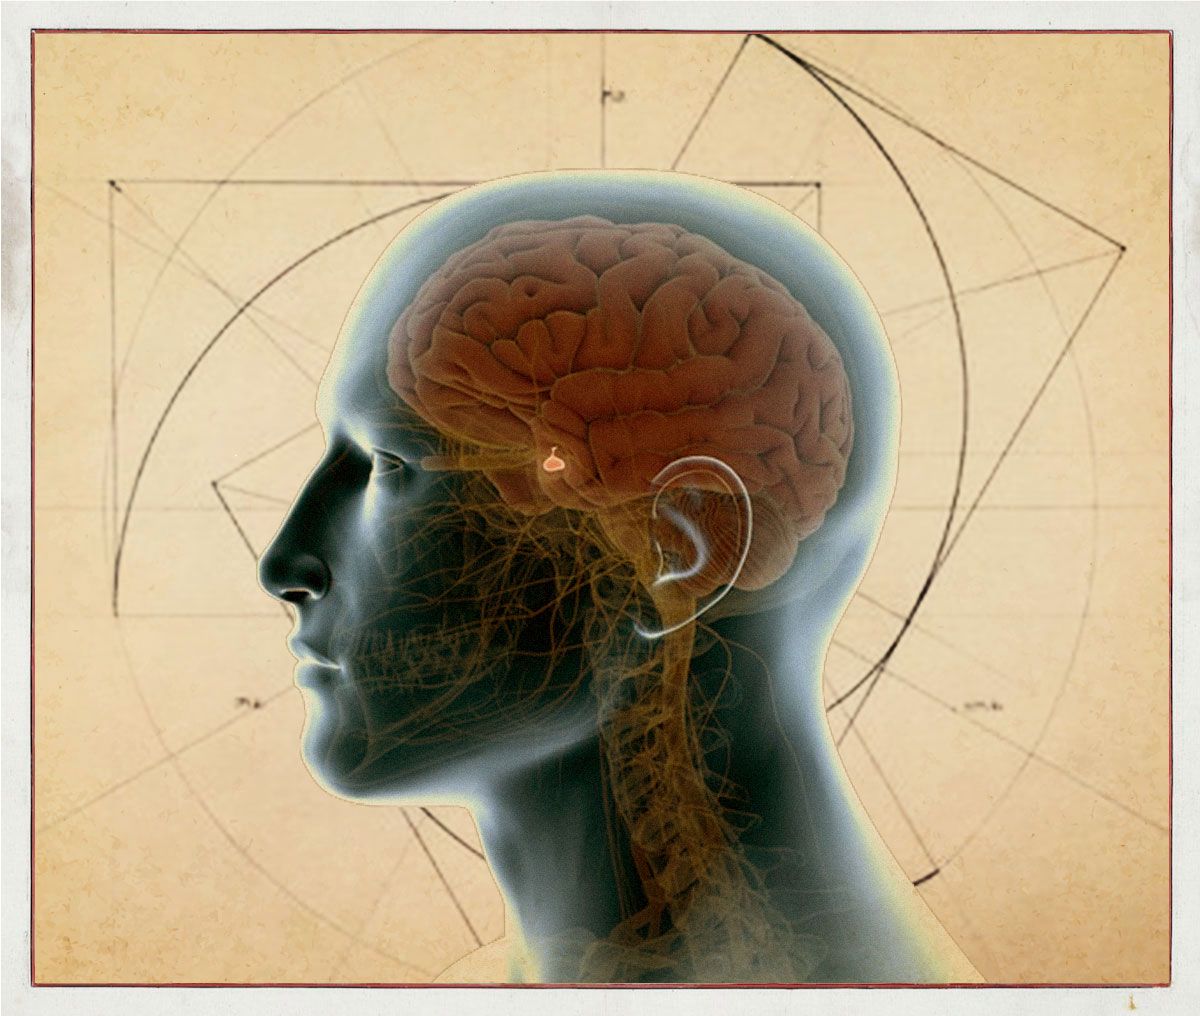 Pineal Gland - Your Third Eye?